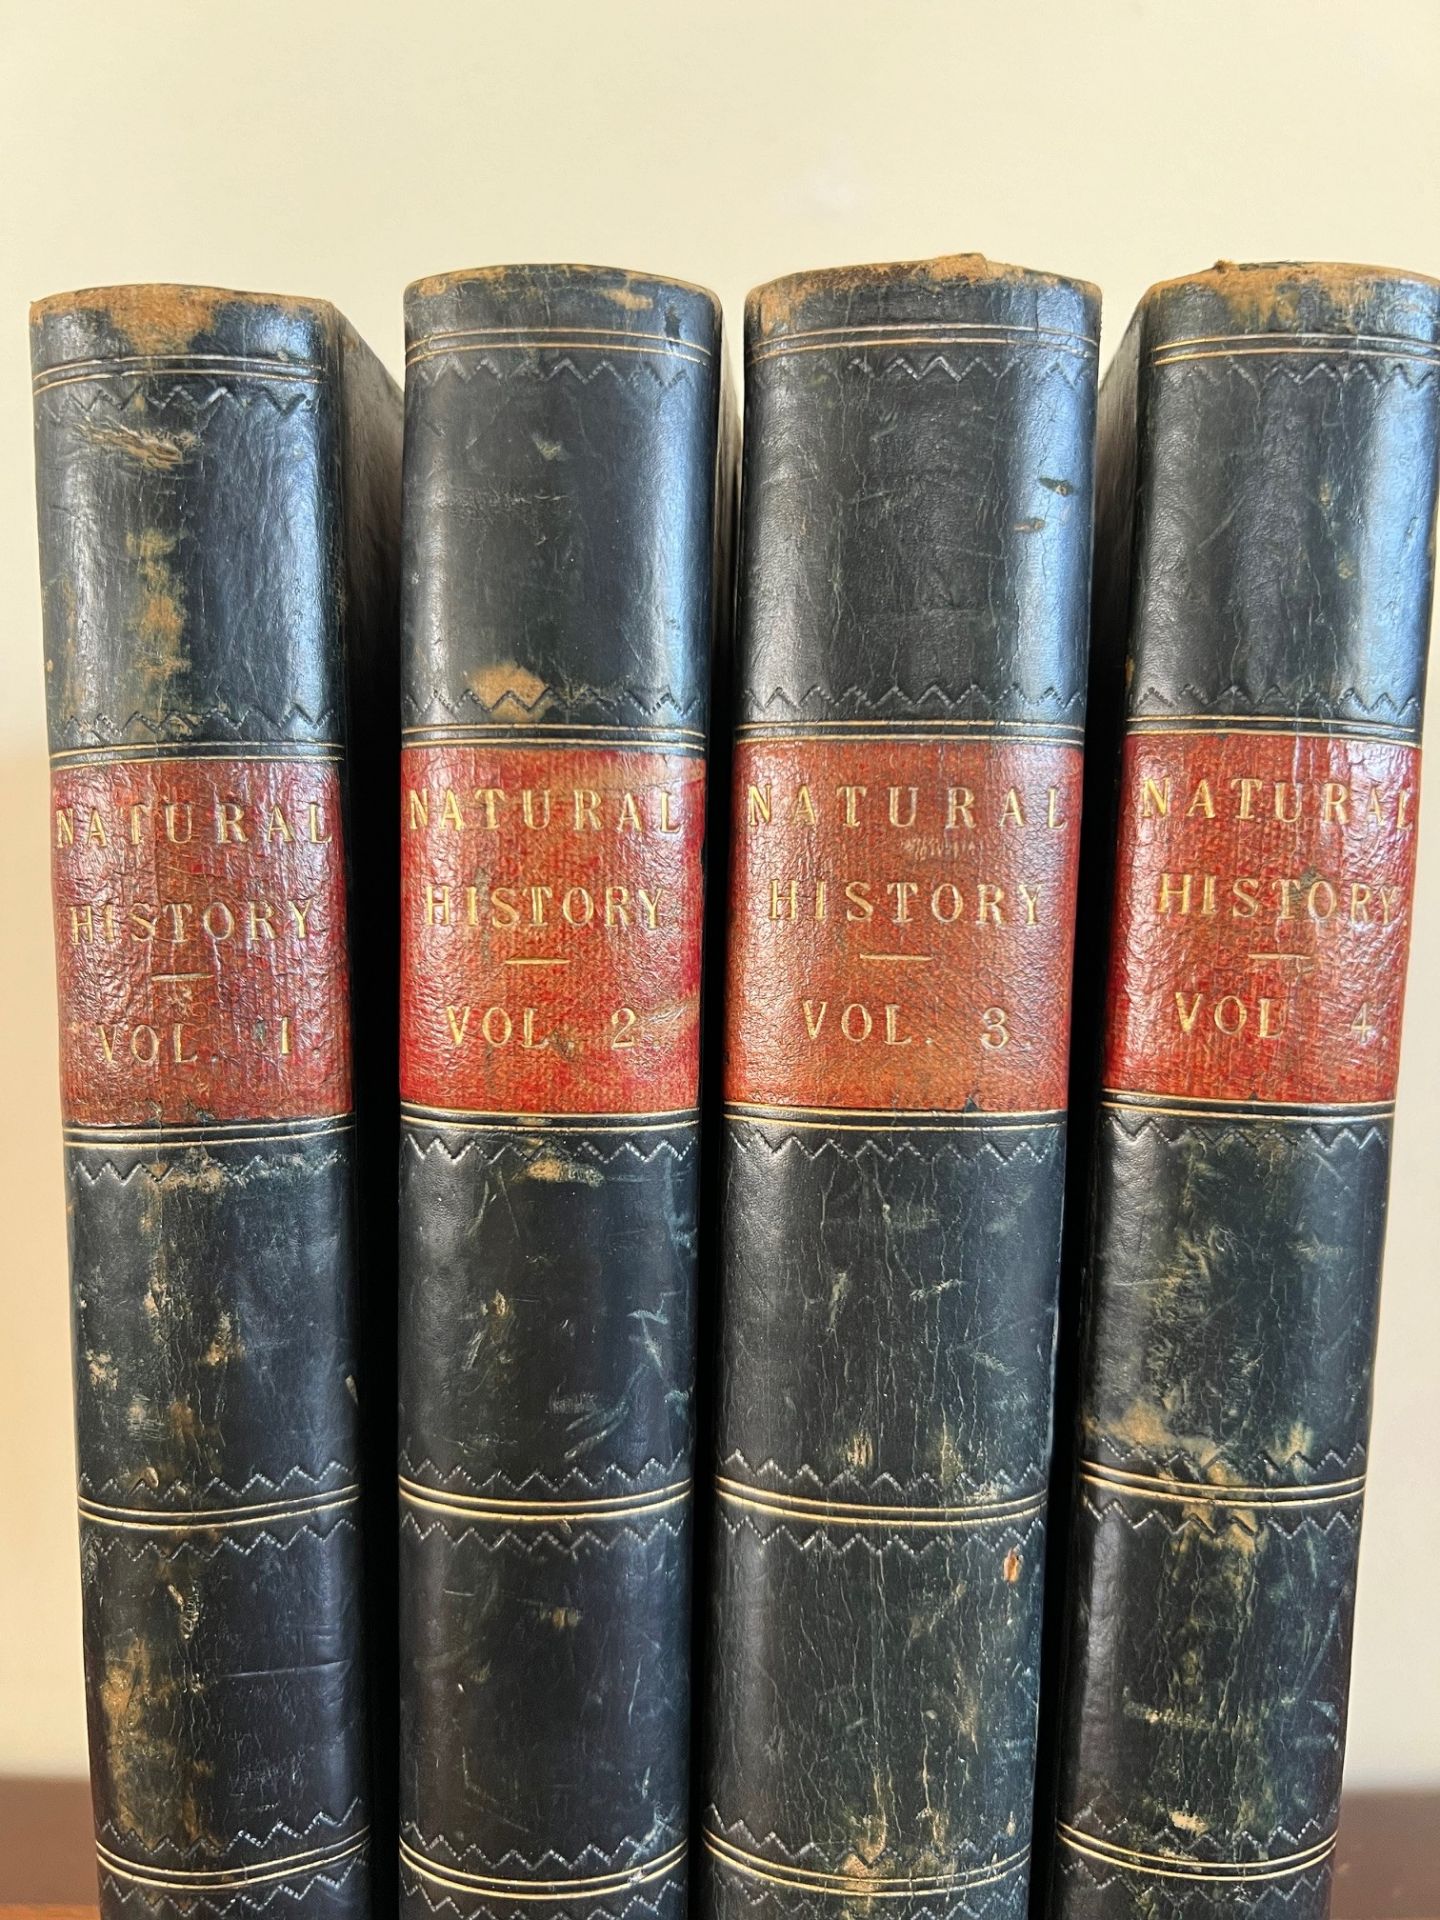 CASSELL'S NATURAL HISTORY, FOUR VOLUMES, QUARTER LEATHER BOARDS